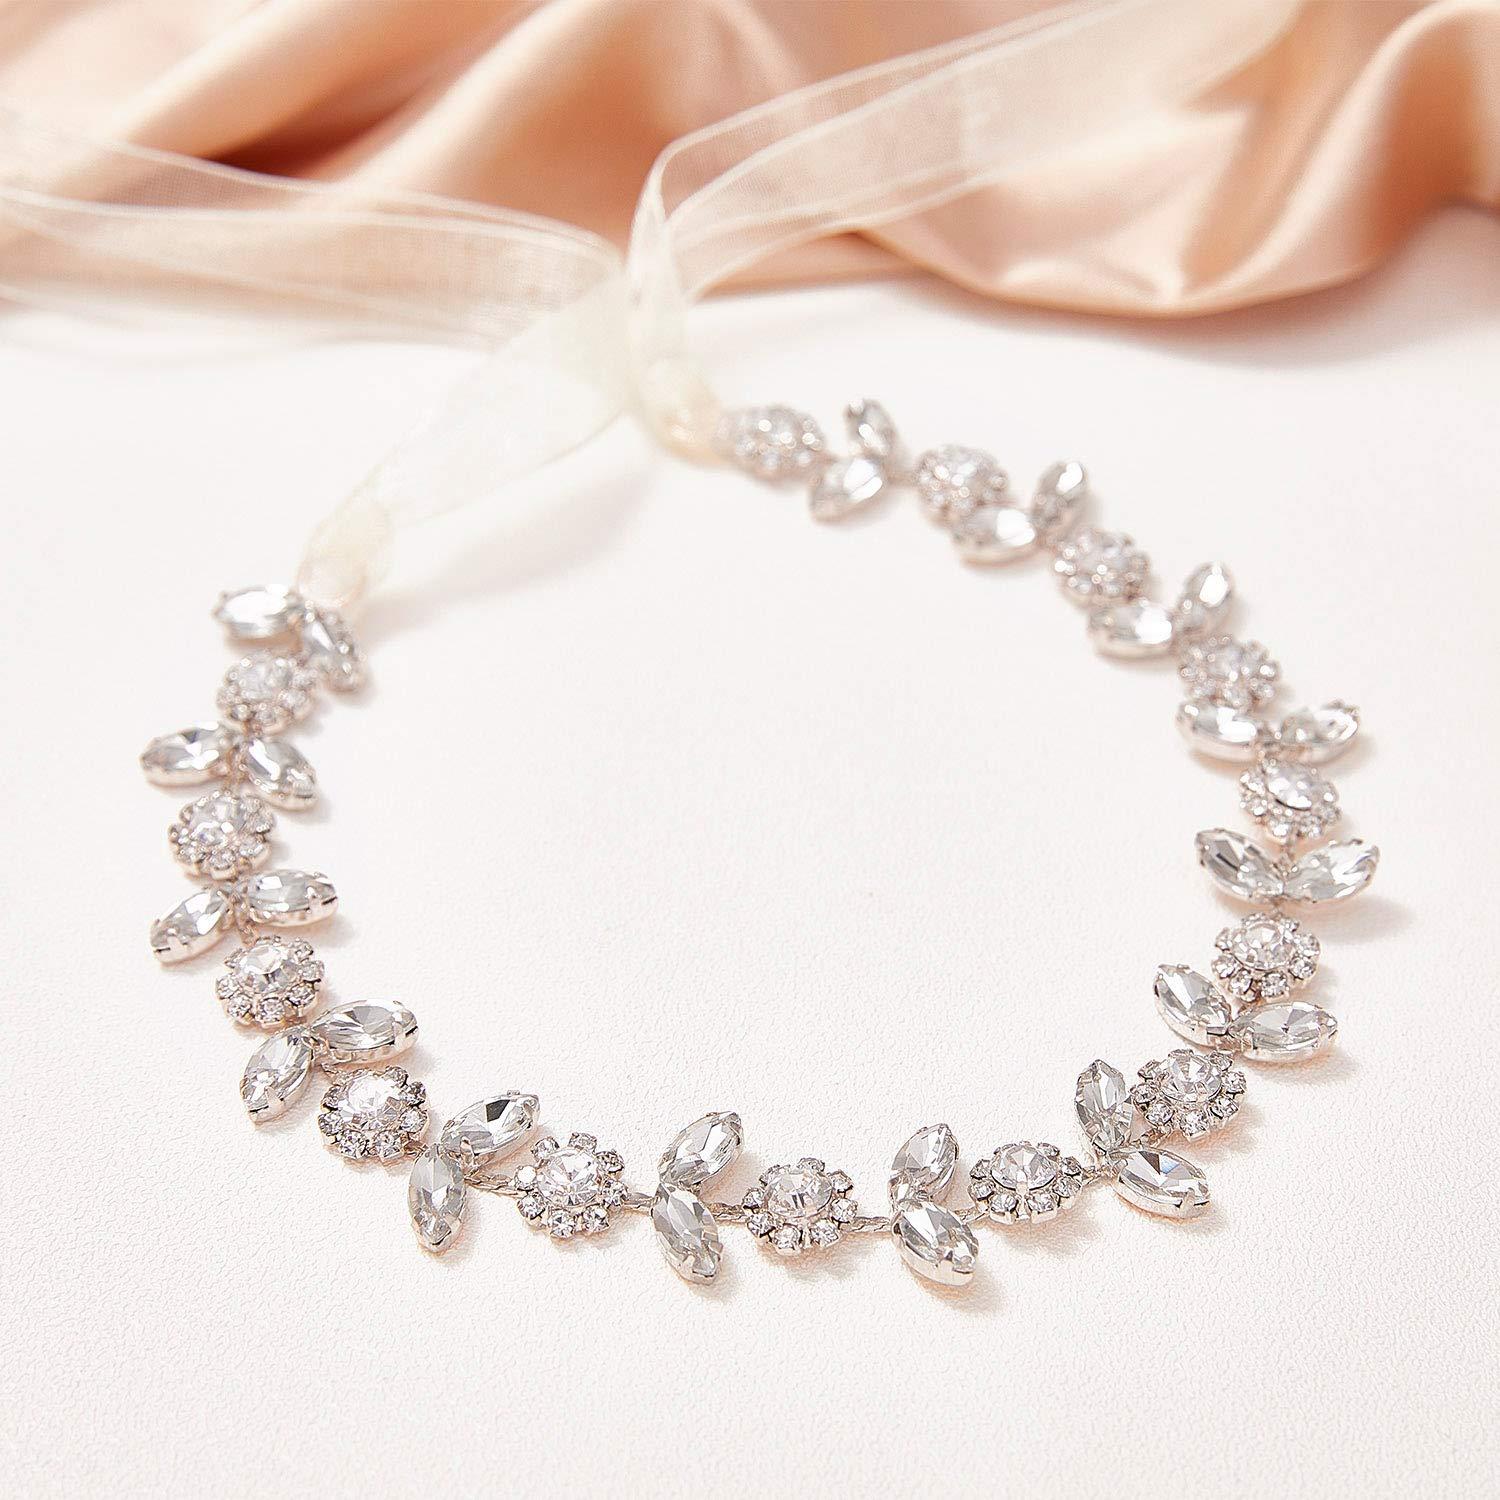 Sparkling Crystal Bridal Headband With Silver Rhinestones Luxurious Heavy  Bridal Necklace Set For Women AL9818 From Allloves, $45.21